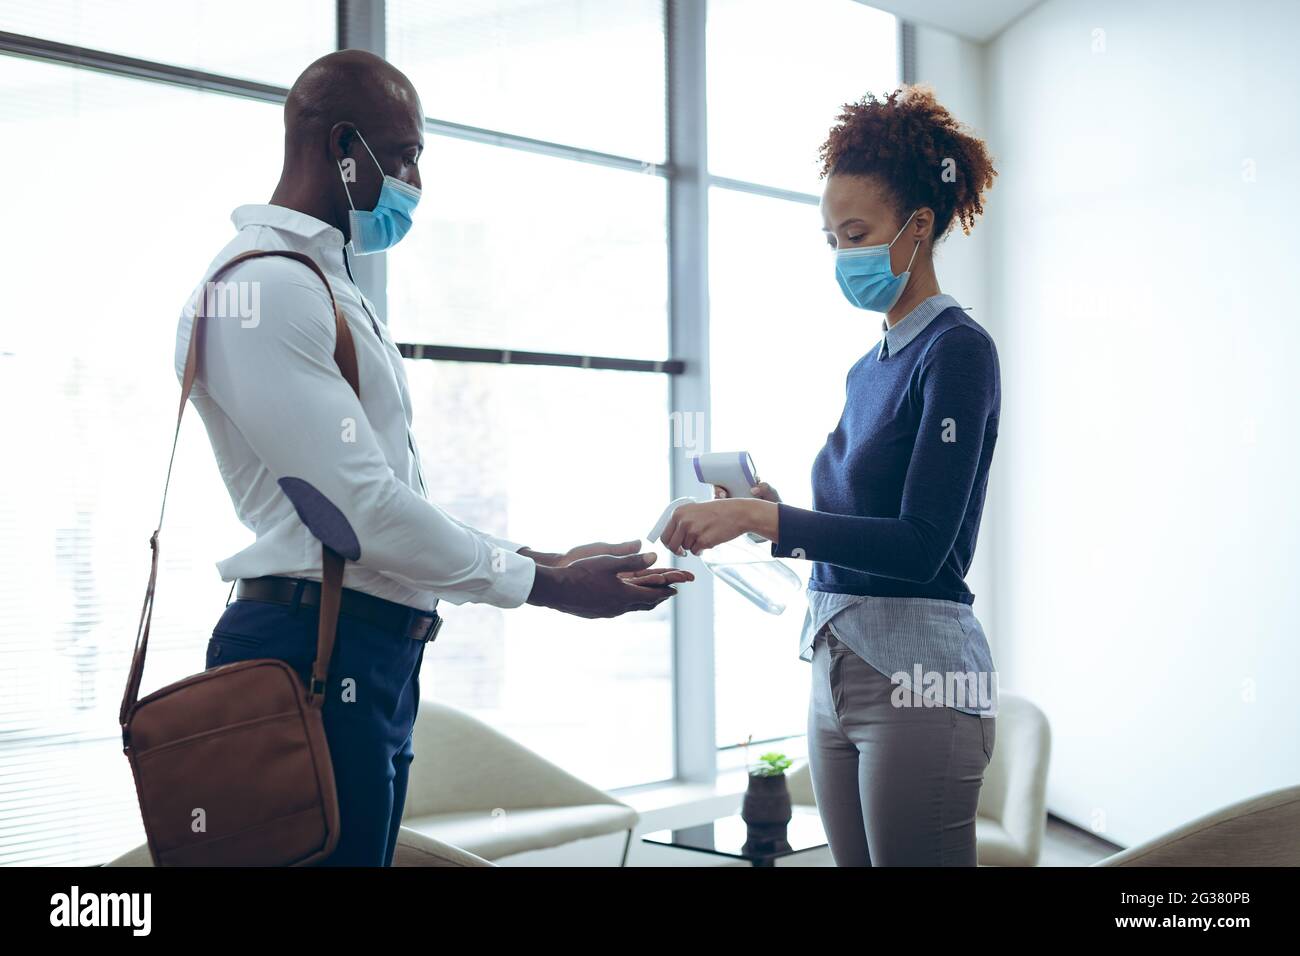 Two diverse business colleagues wearing face masks disinfecting hands and taking temperature Stock Photo